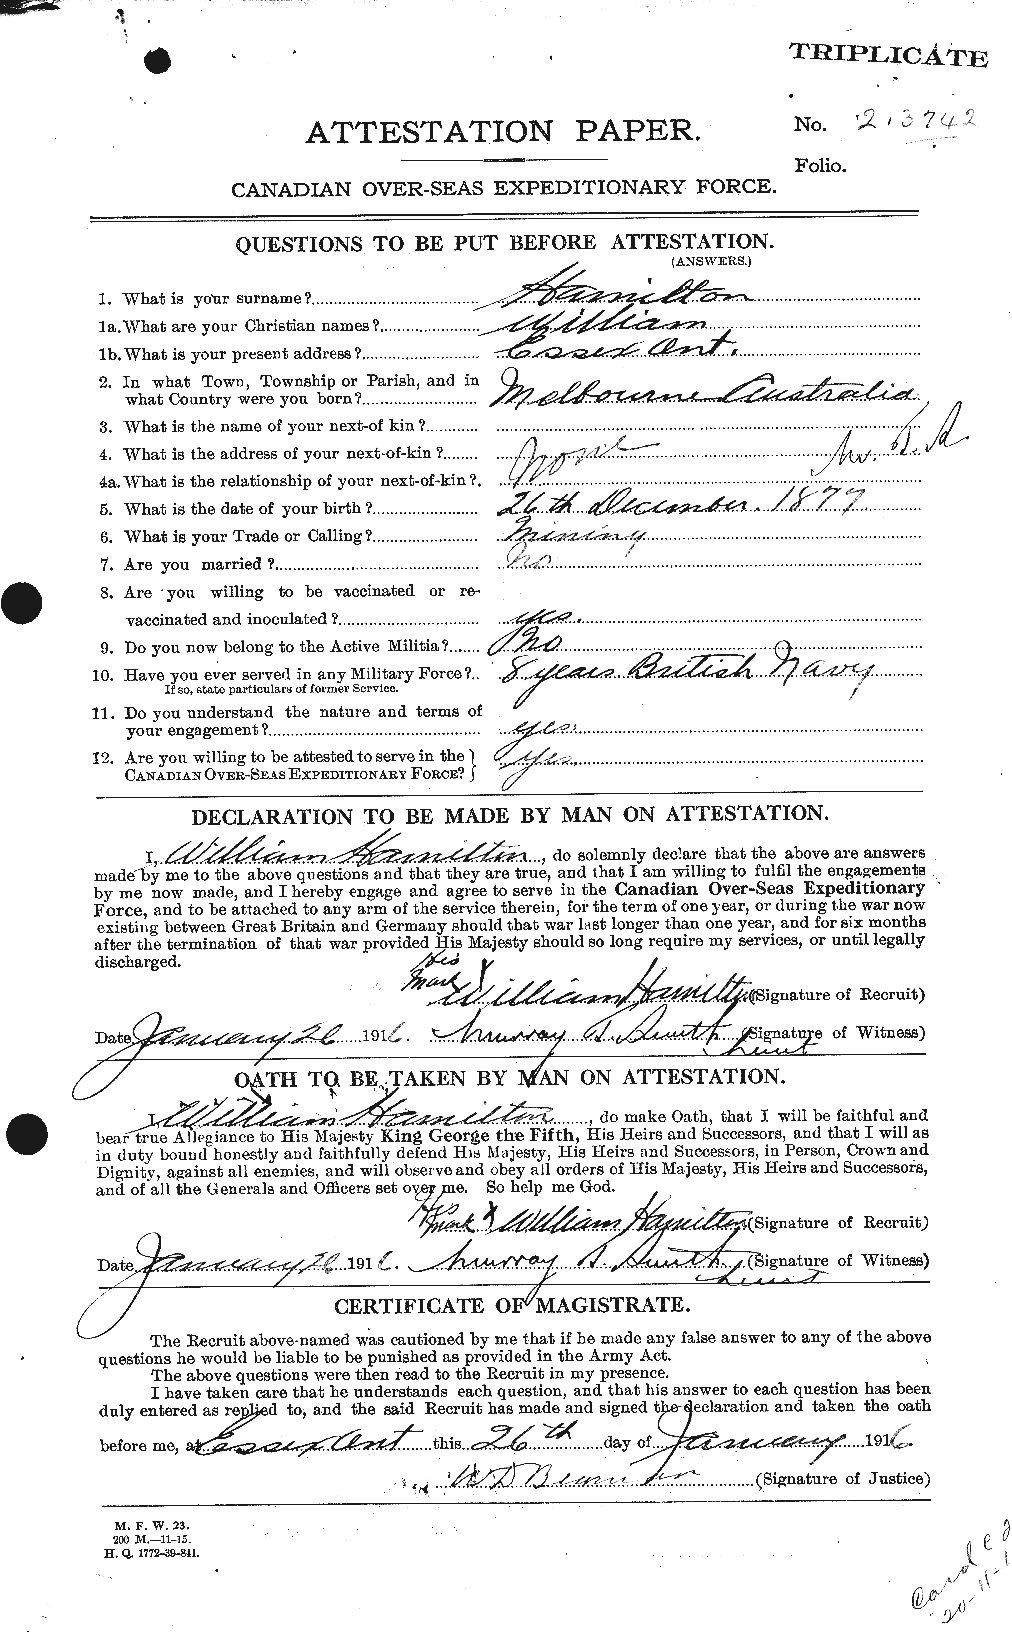 Personnel Records of the First World War - CEF 374865a